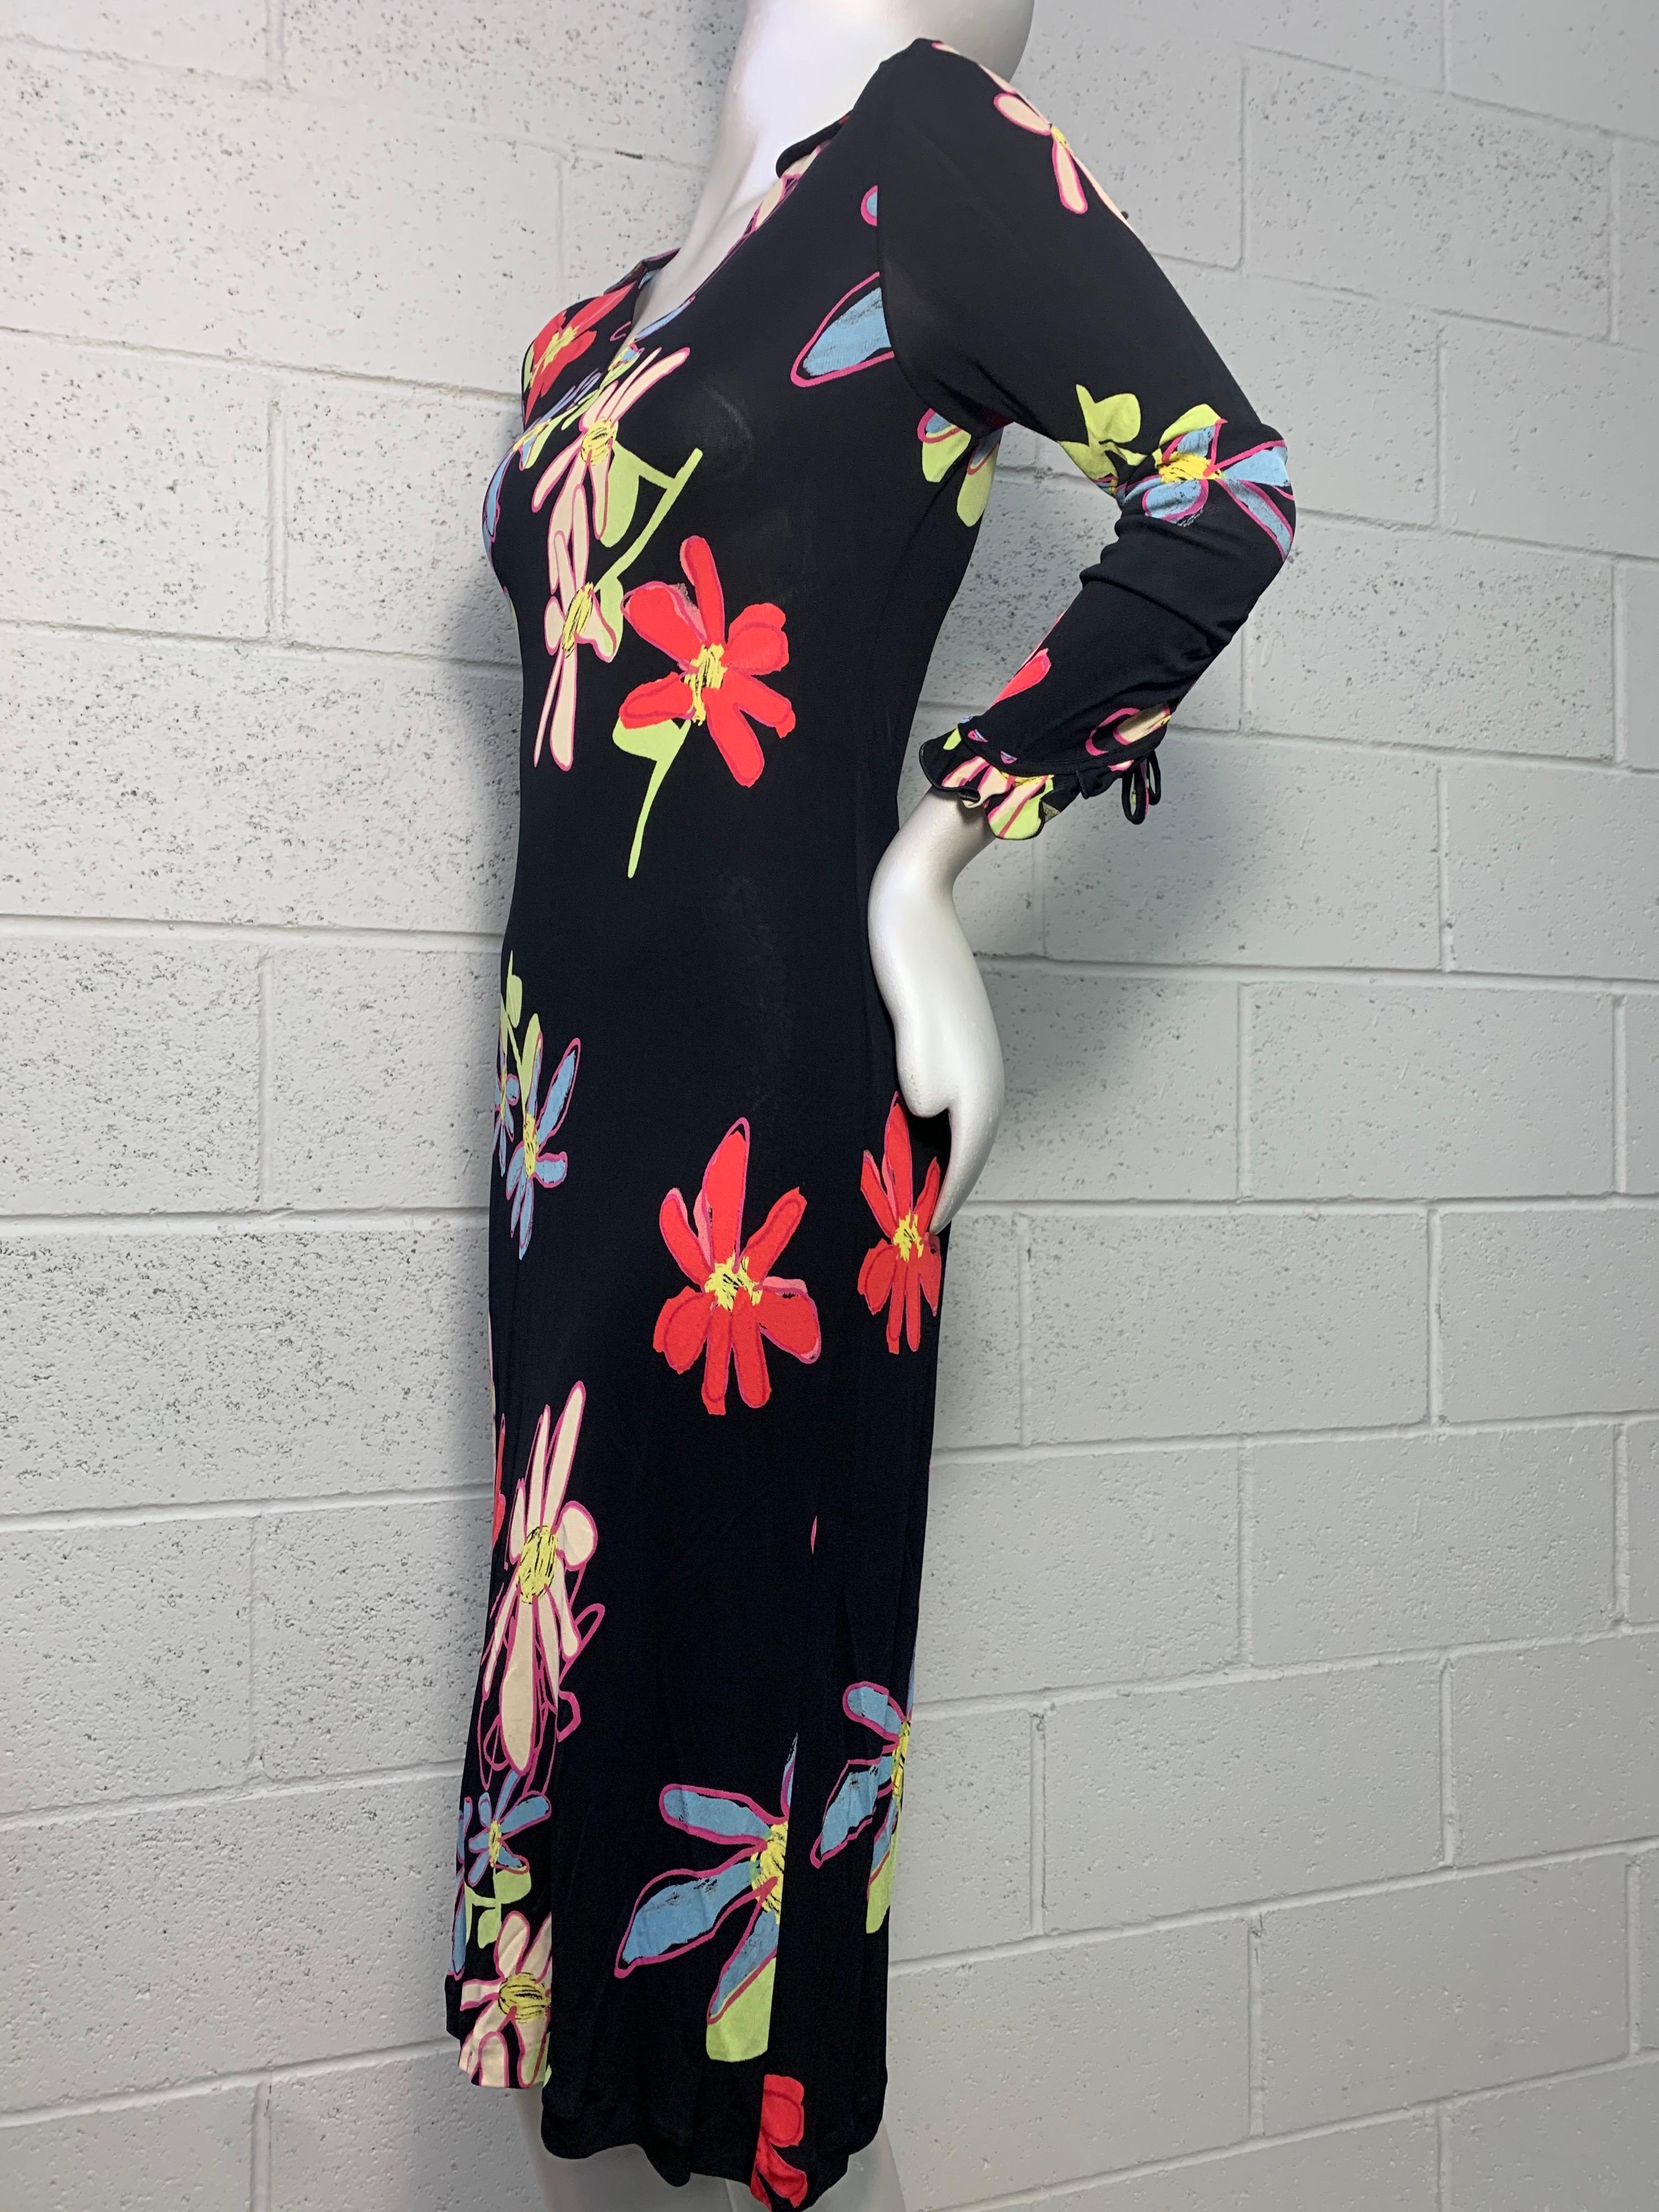 2000 Christian Lacroix Bias Cut 1930s-Inspired Rayon Jersey Floral Print Dress For Sale 2